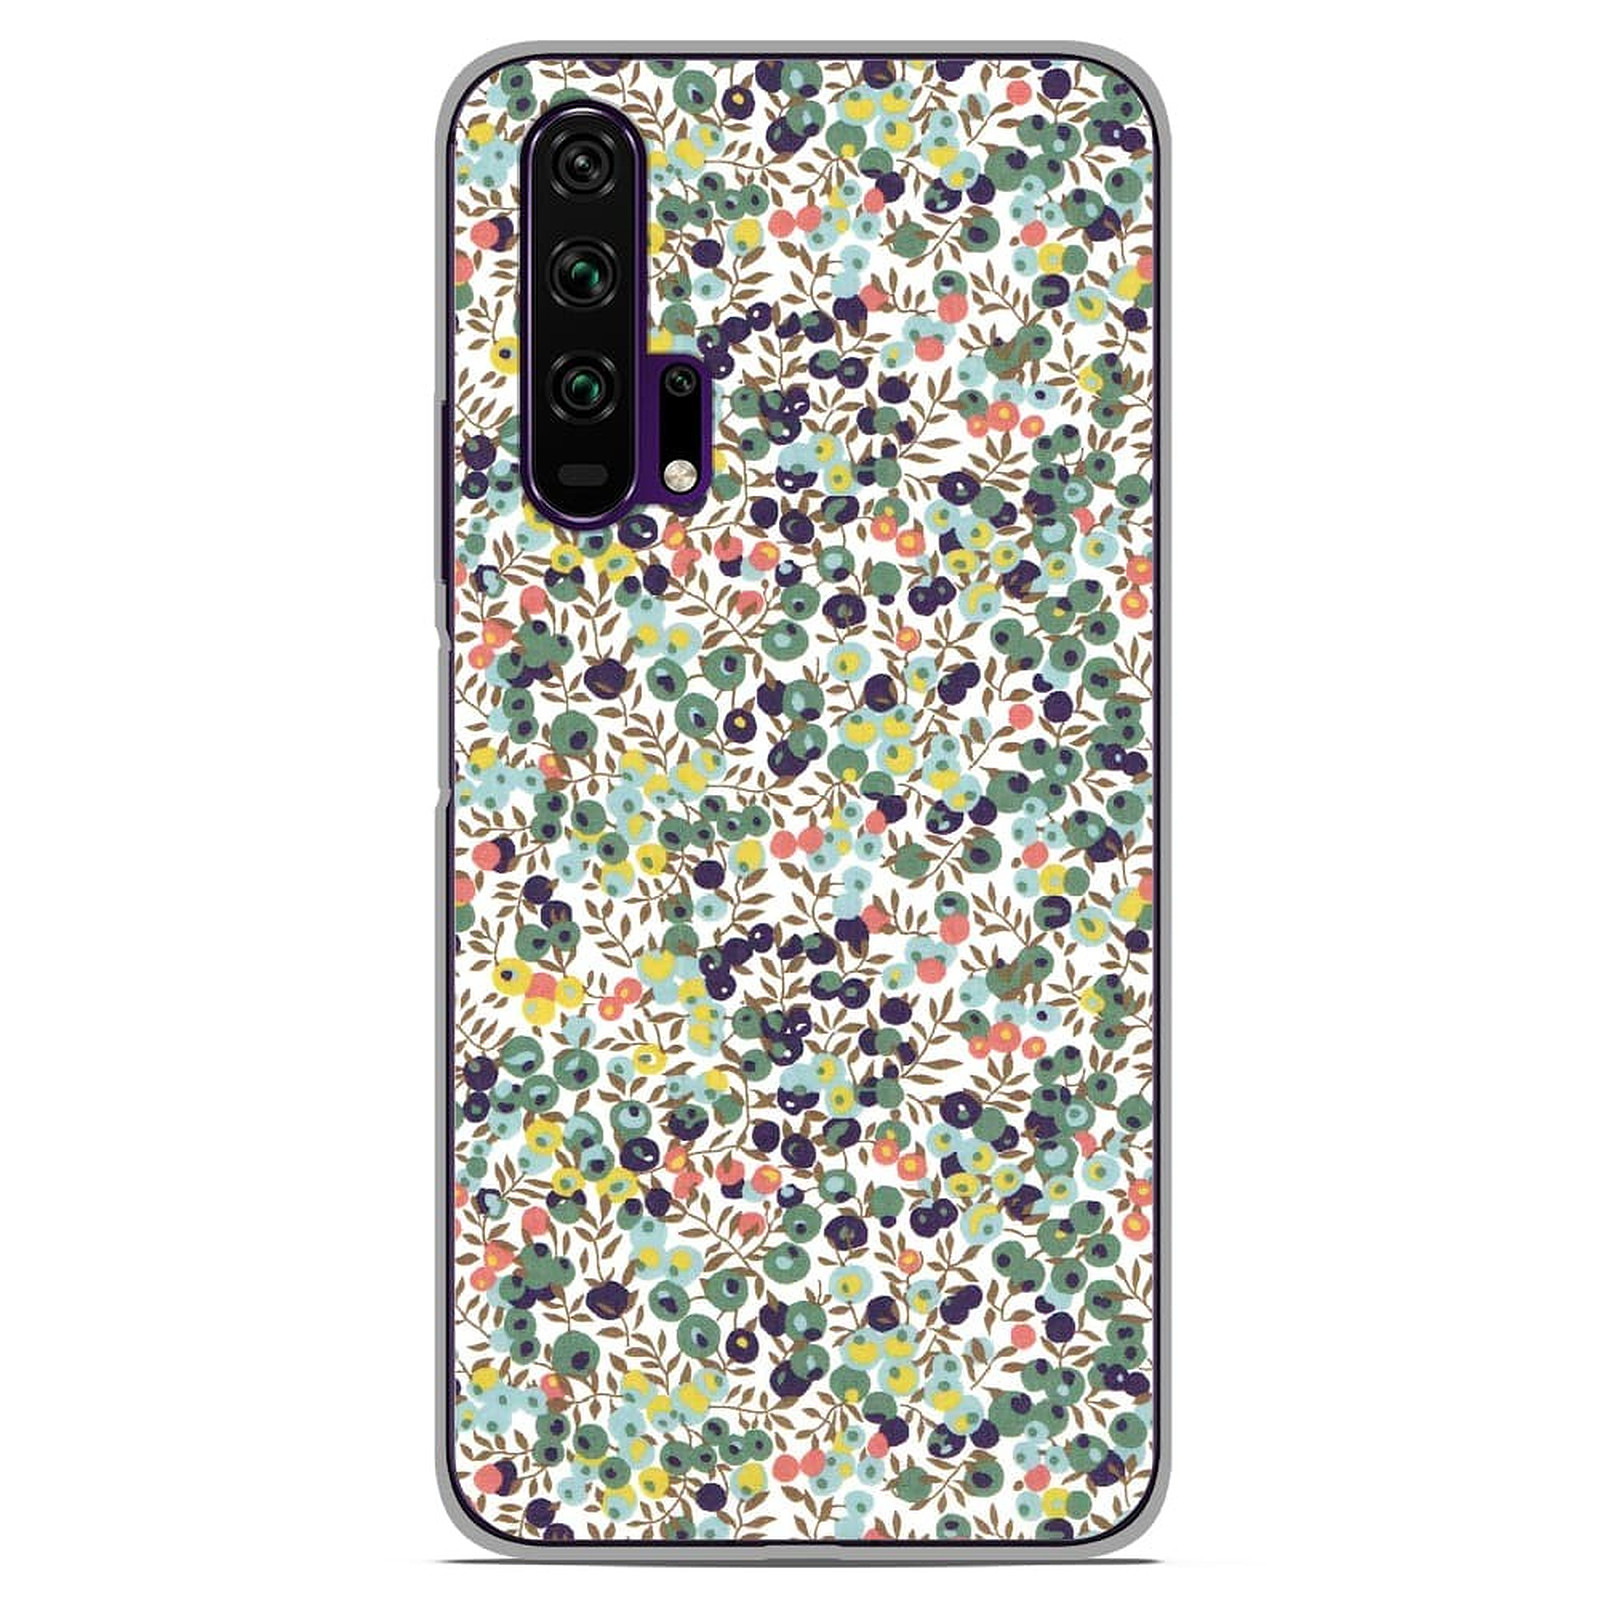 1001 Coques Coque silicone gel Huawei Honor 20 Pro motif Liberty Wiltshire Vert - Coque telephone 1001Coques